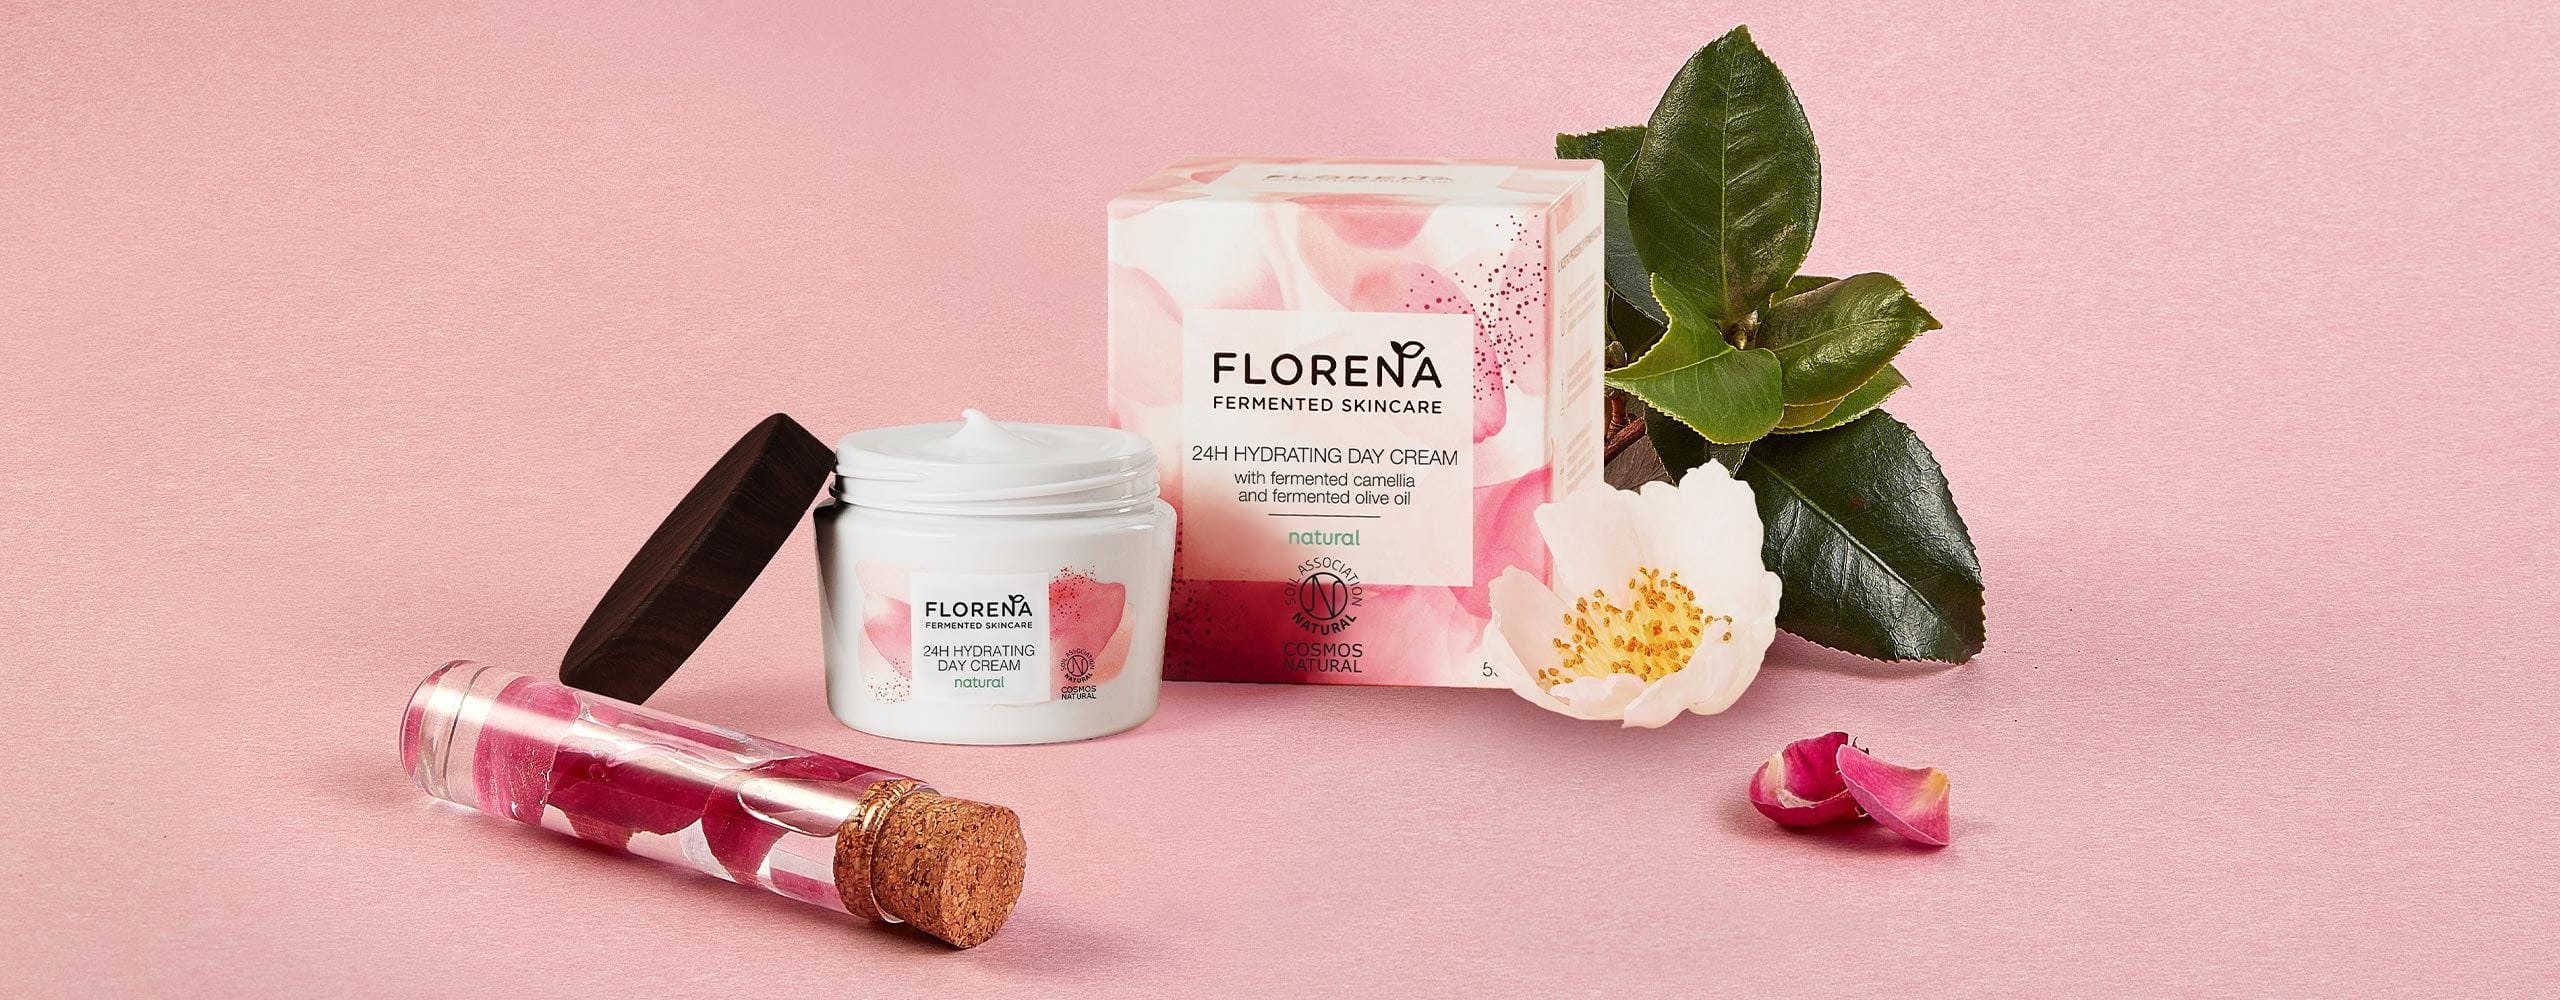 florena products